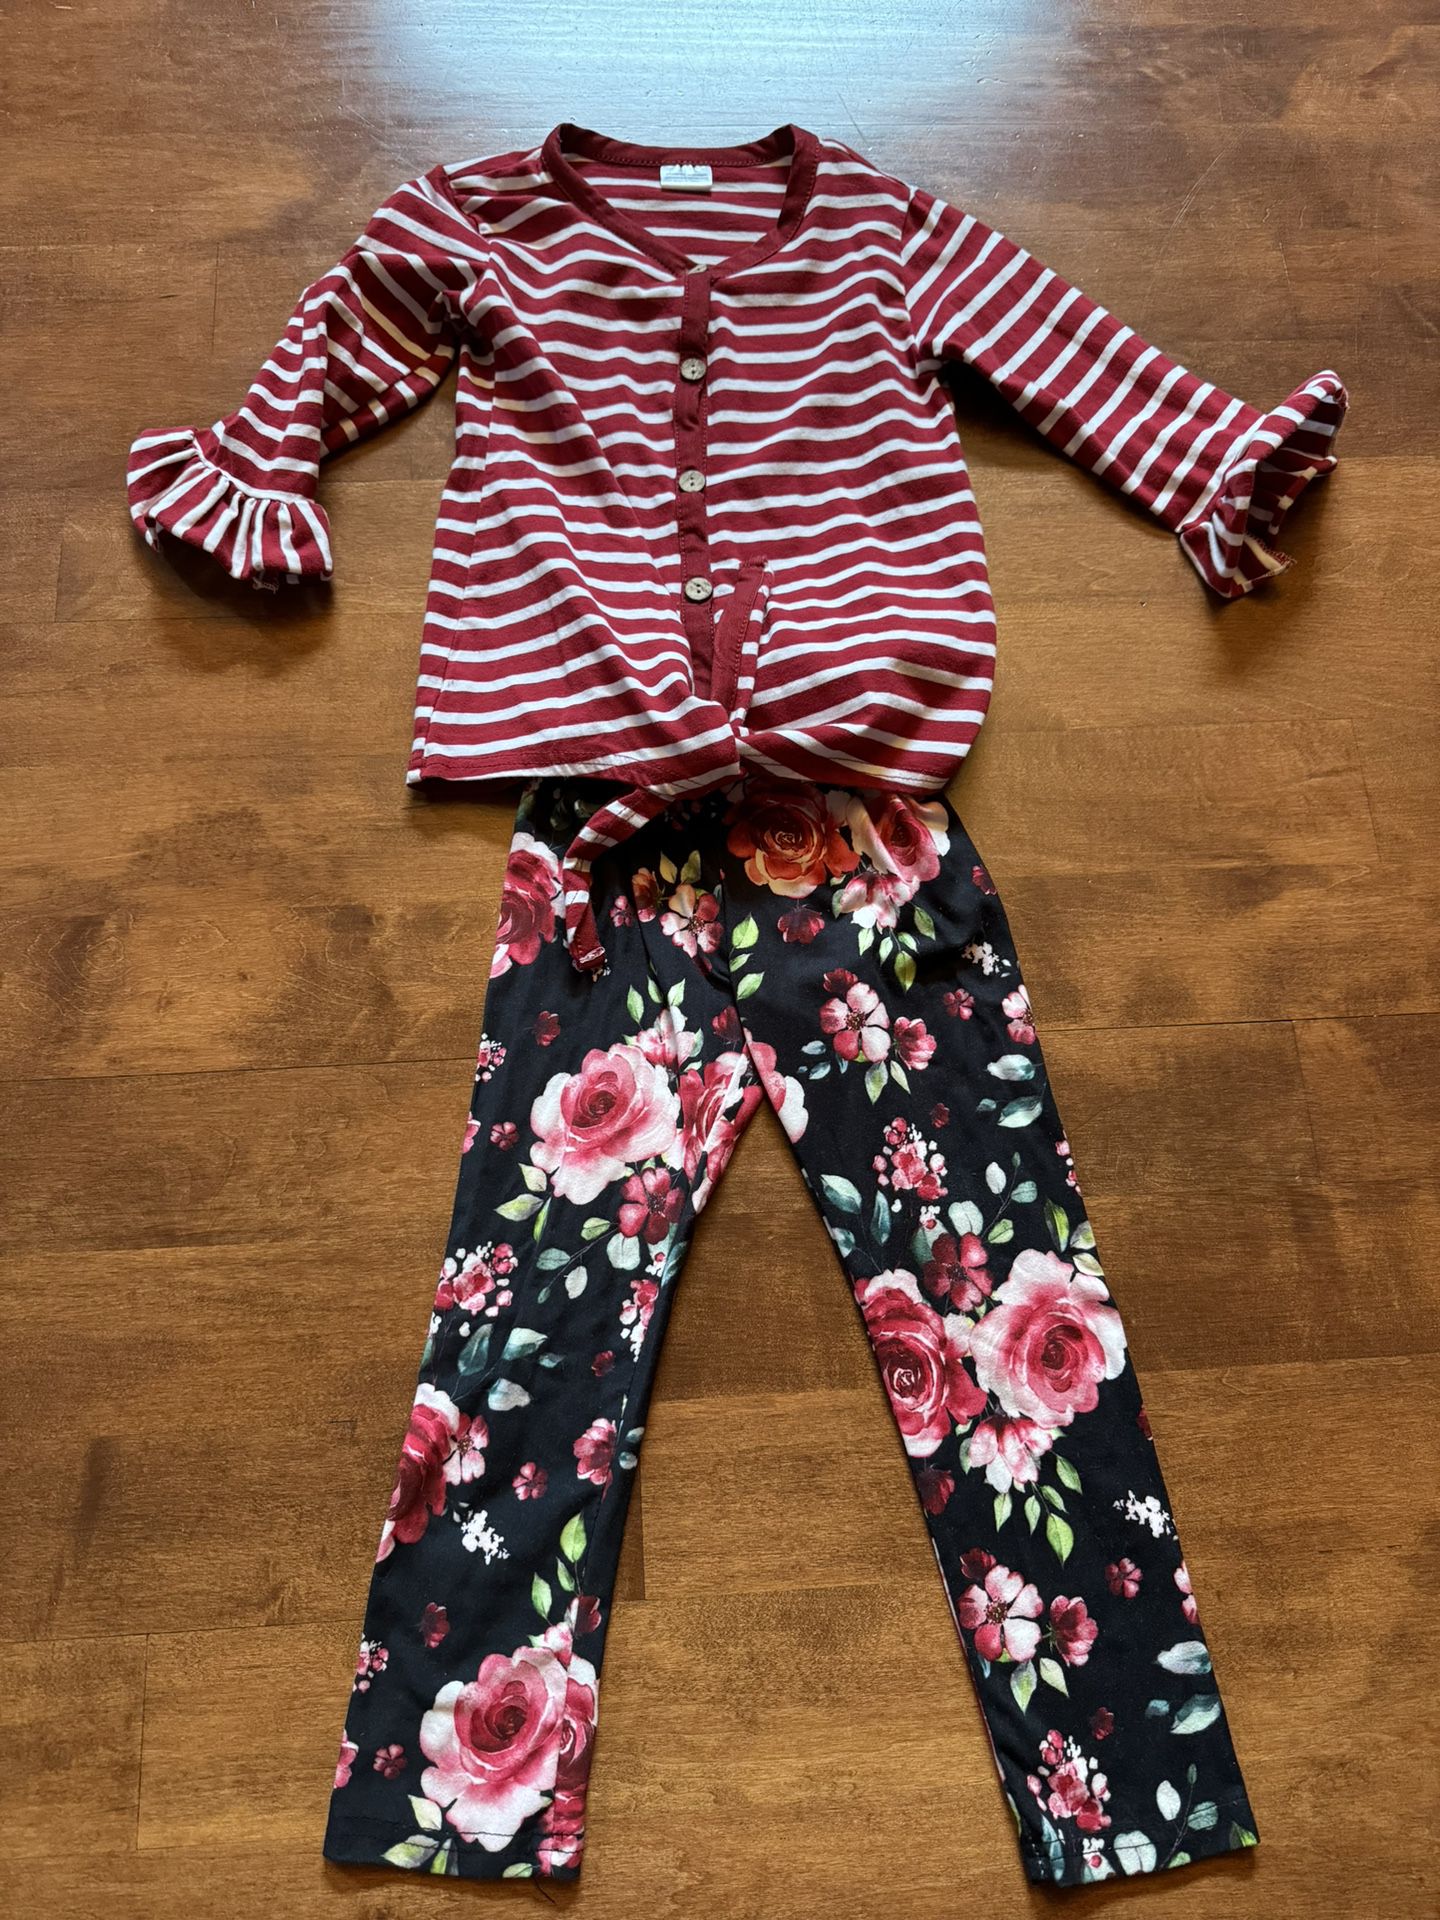 Little Girls, Matching Boutique Outfit Shipping Available